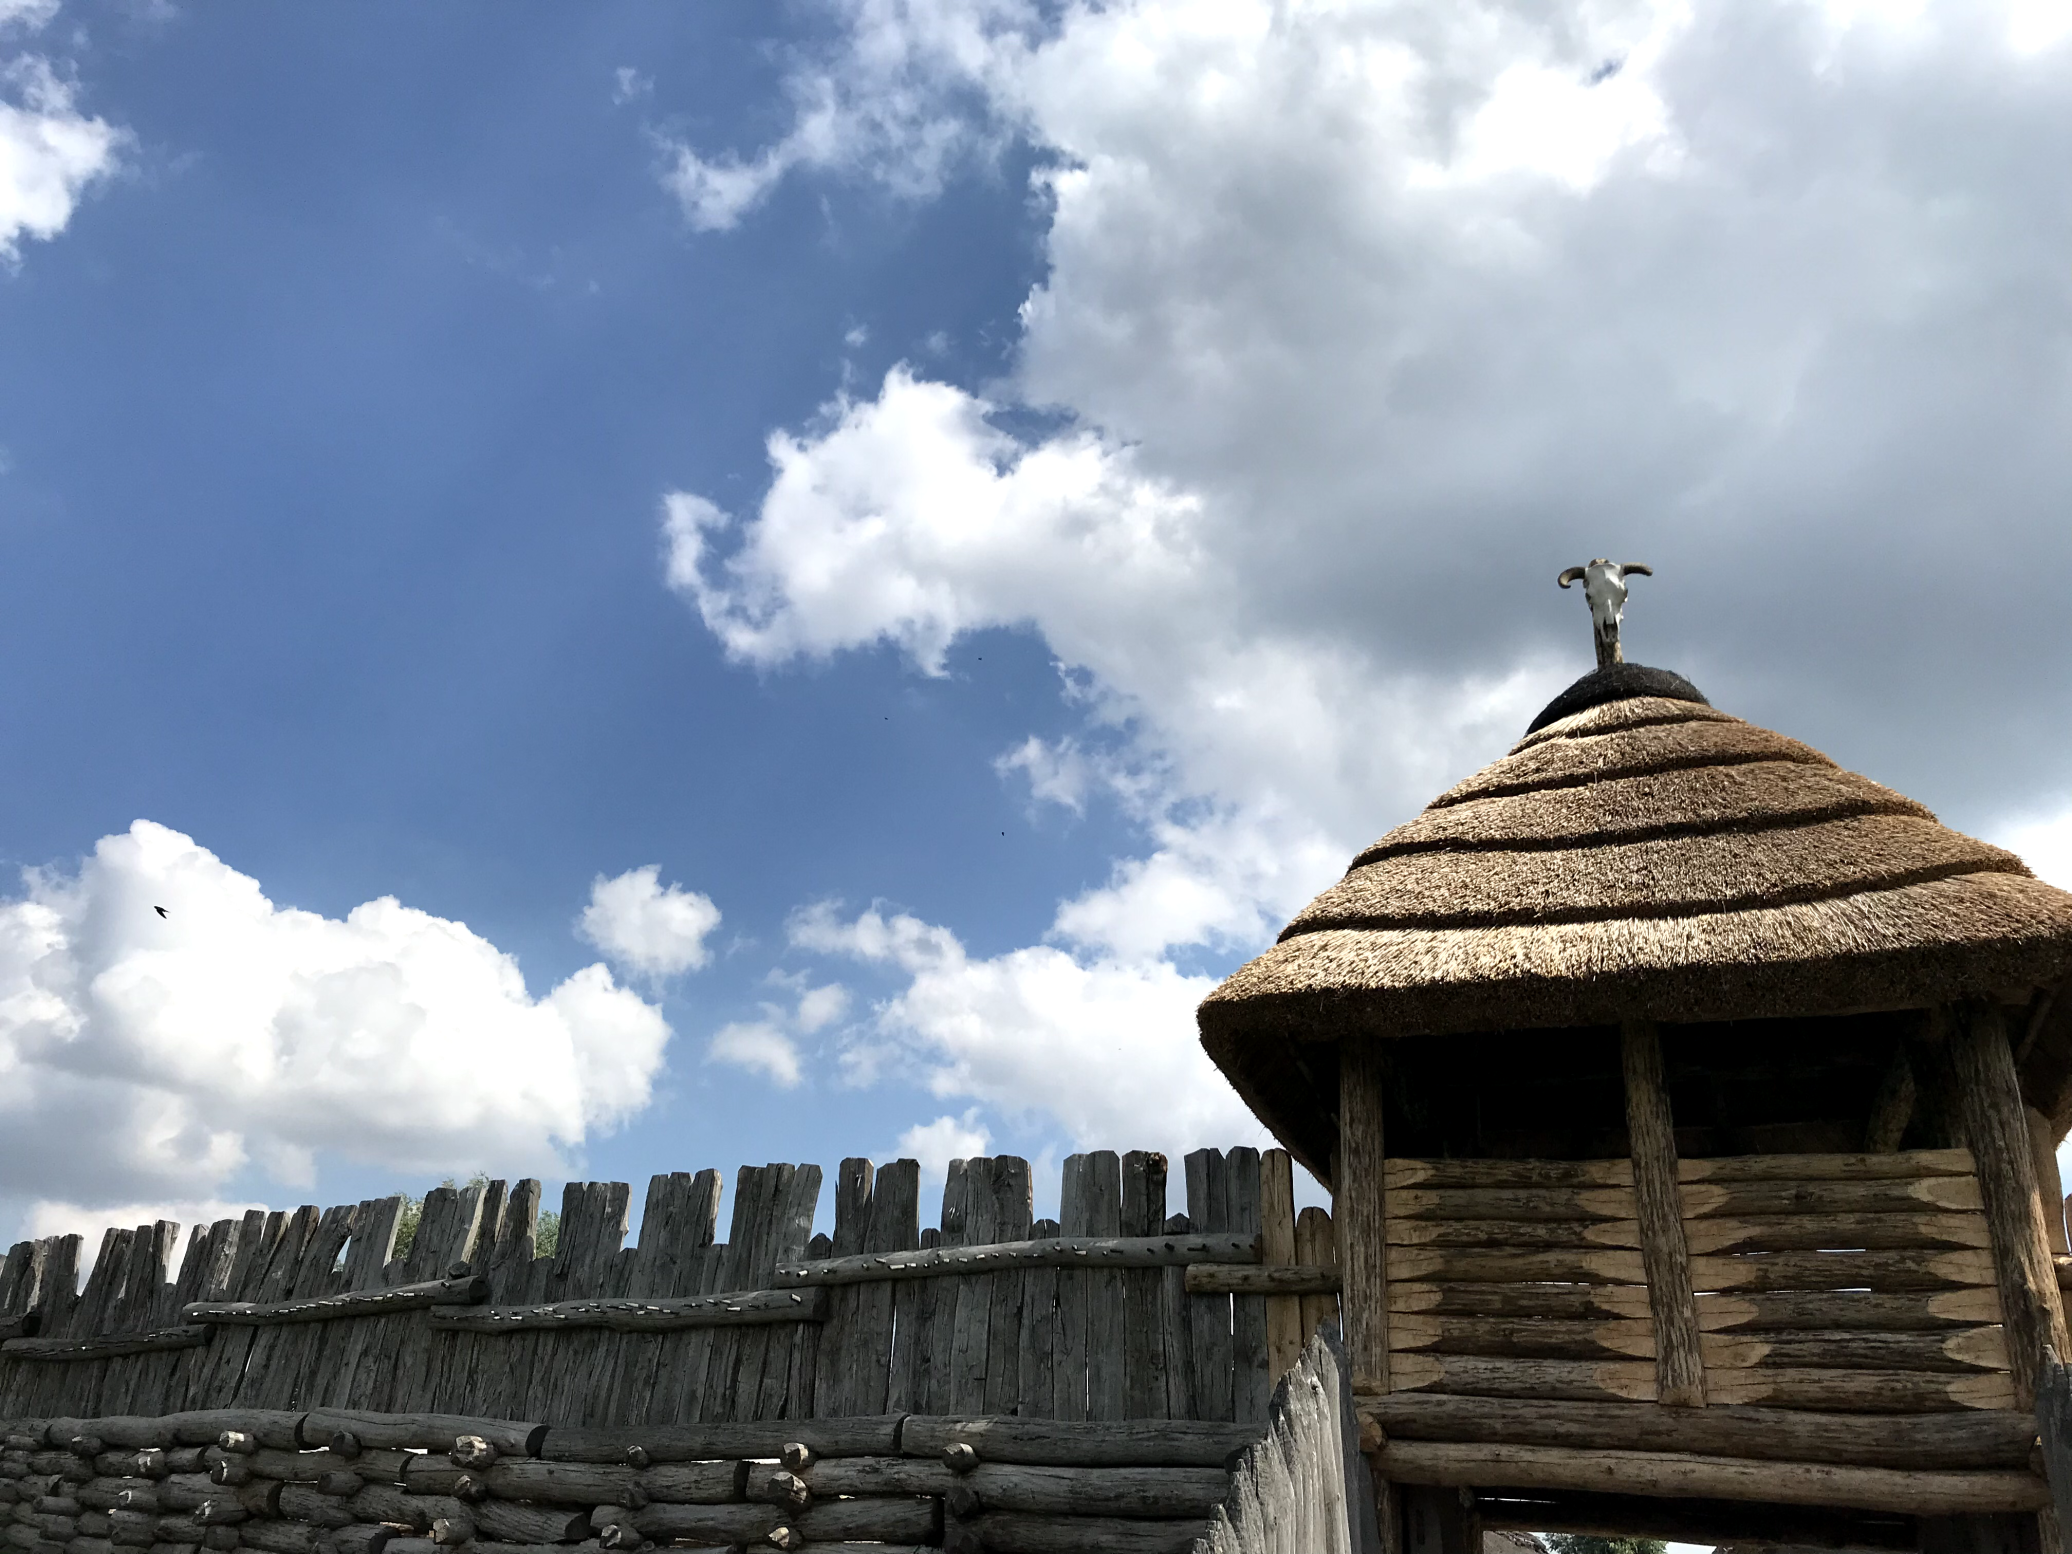 "The reconstructed wooden walls of the Bronze Age Settlement, Biskupin in modern day Poland" -Trey Swenton